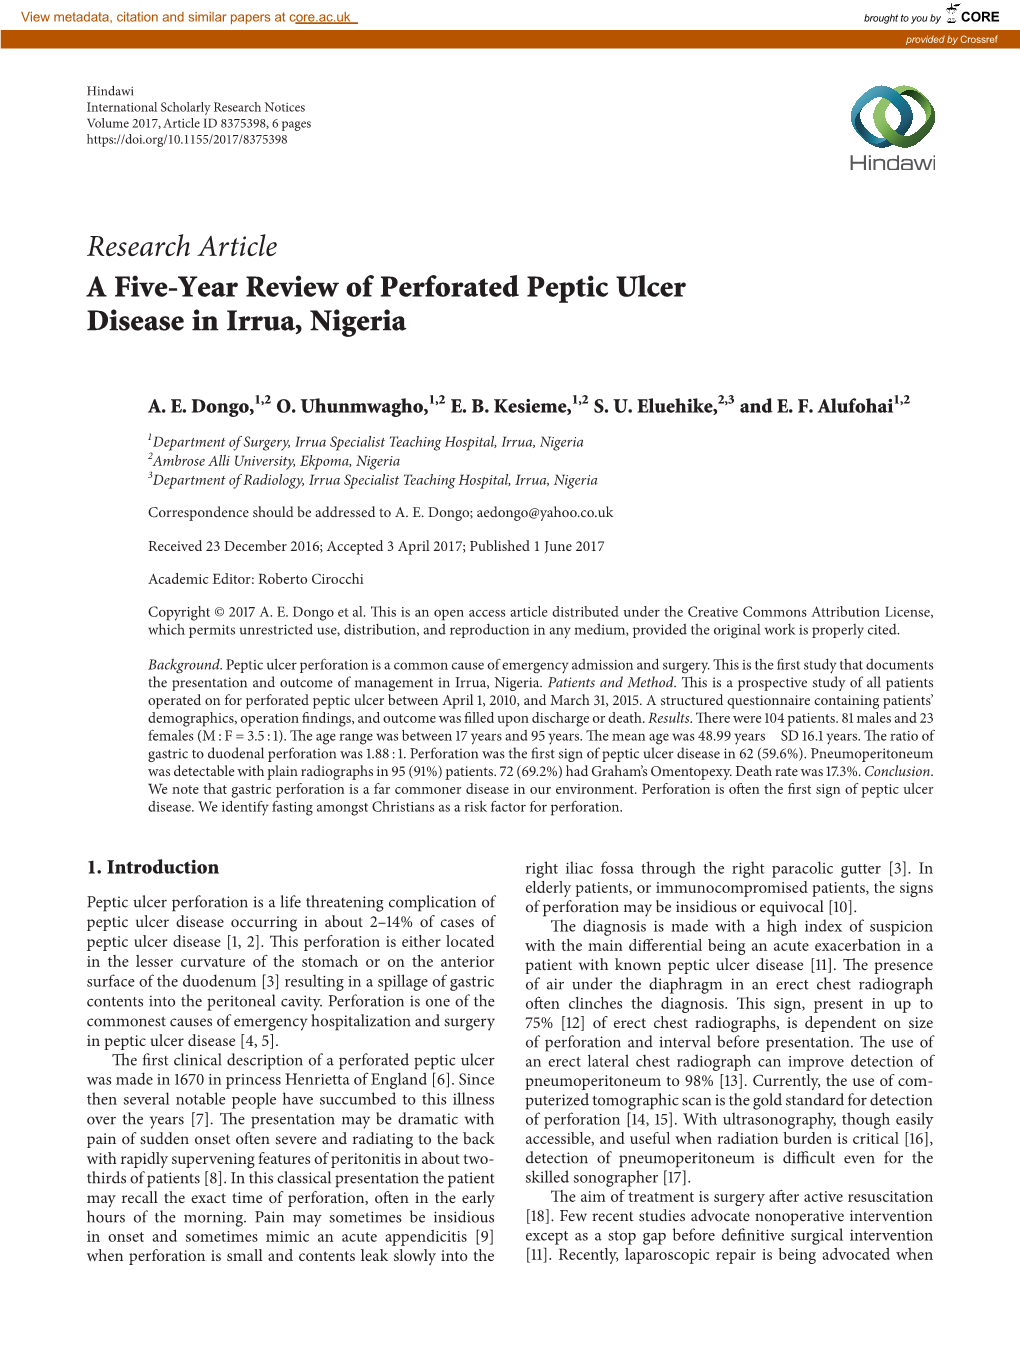 Research Article a Five-Year Review of Perforated Peptic Ulcer Disease in Irrua, Nigeria